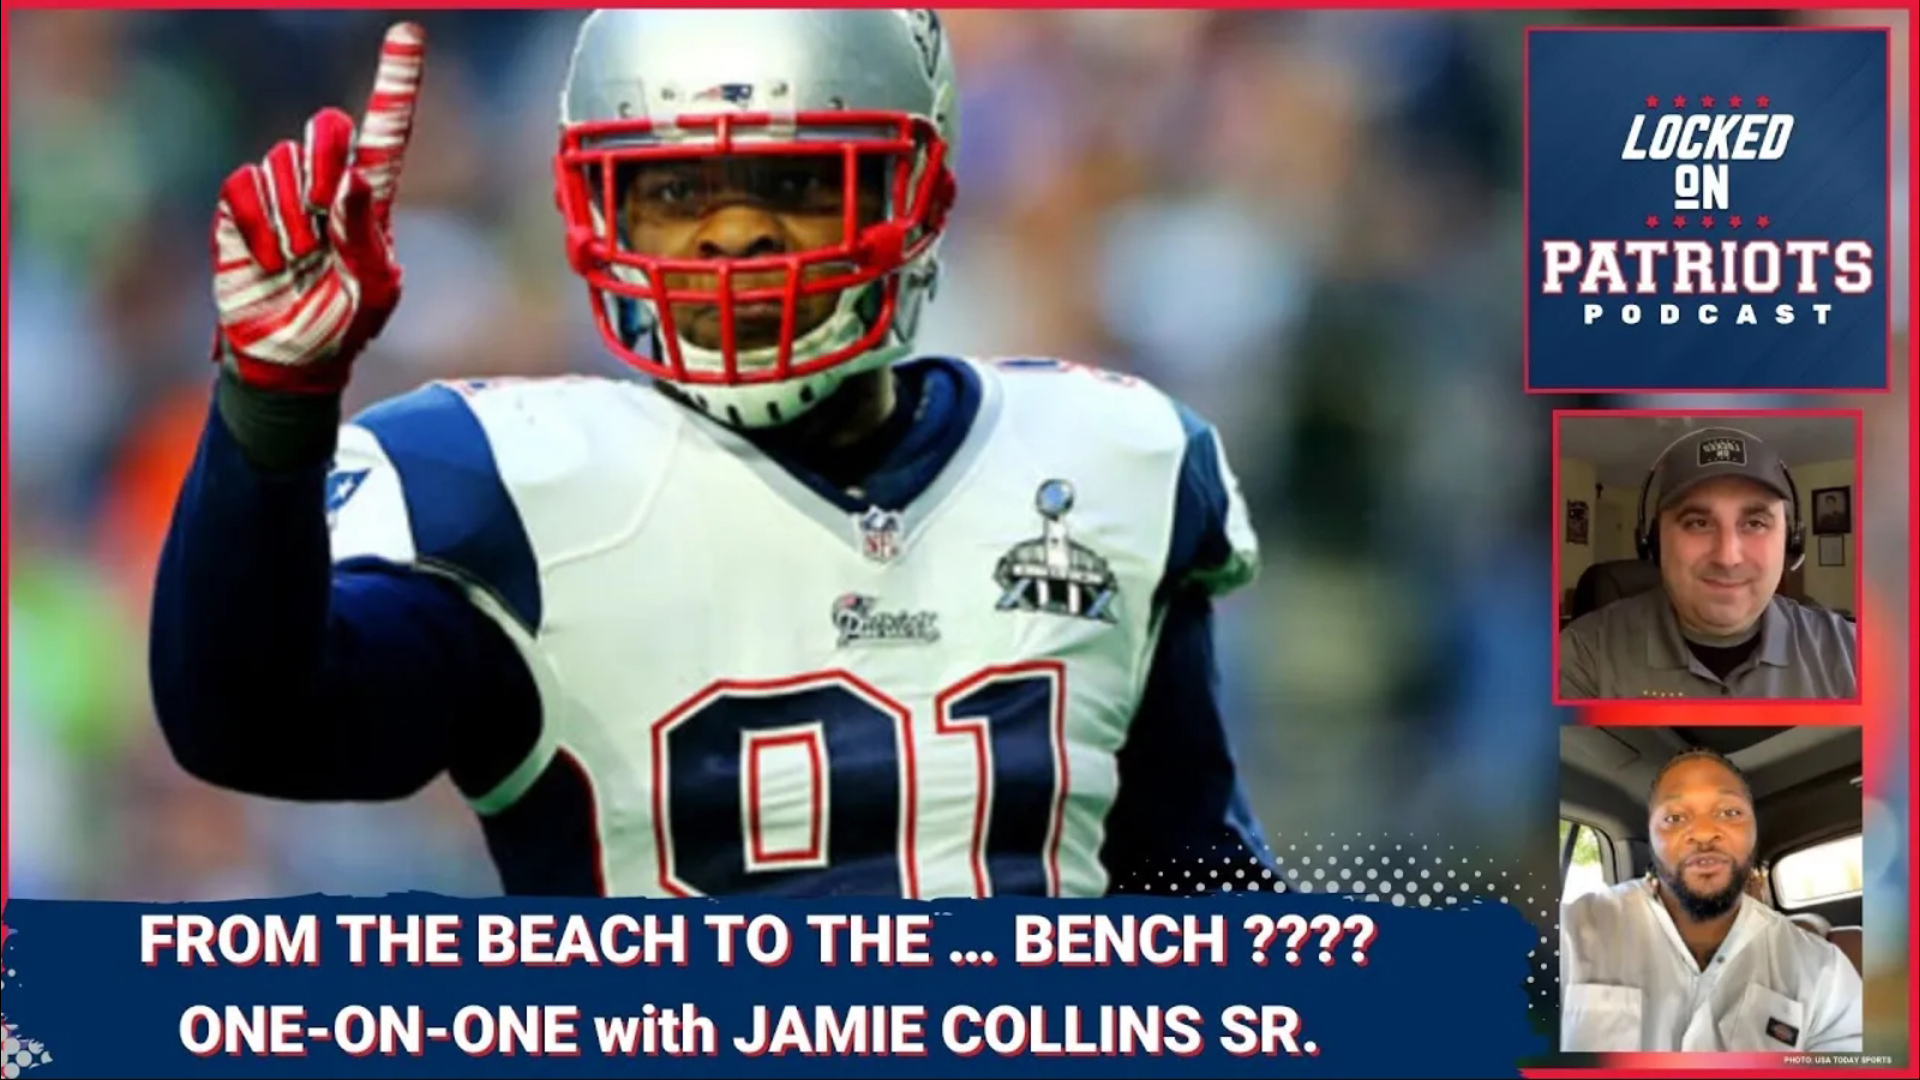 Former New England Patriots linebacker Jamie Collins, Sr. is one of the most dynamic athletes to wear a Pats jersey during coach Bill Belichick’s tenure in Foxboro.